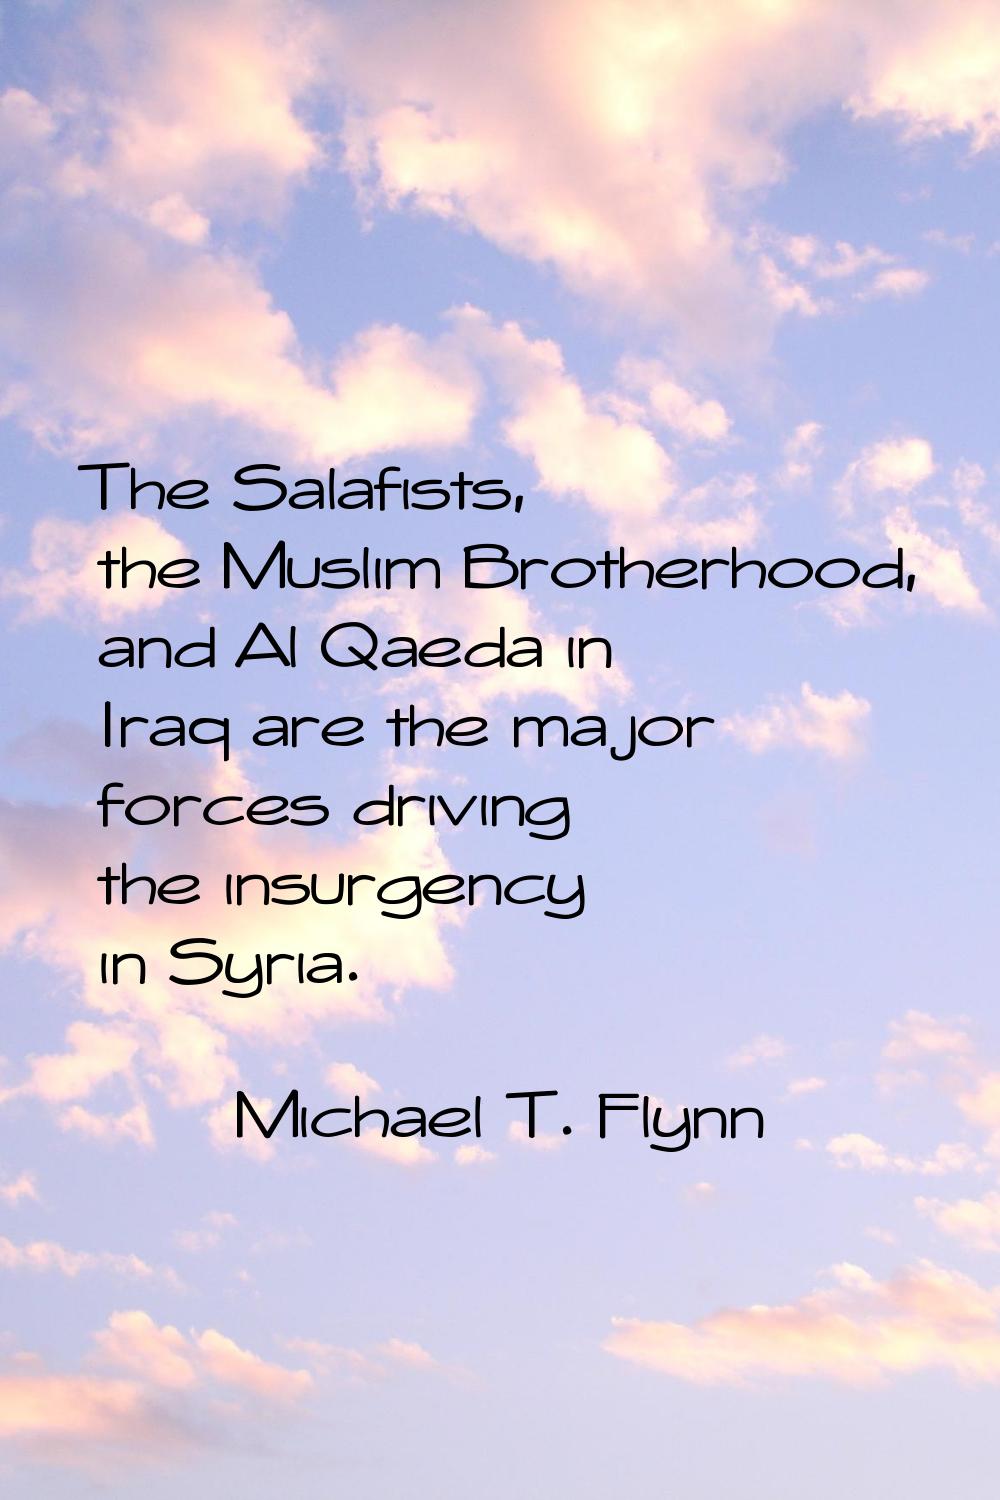 The Salafists, the Muslim Brotherhood, and Al Qaeda in Iraq are the major forces driving the insurg